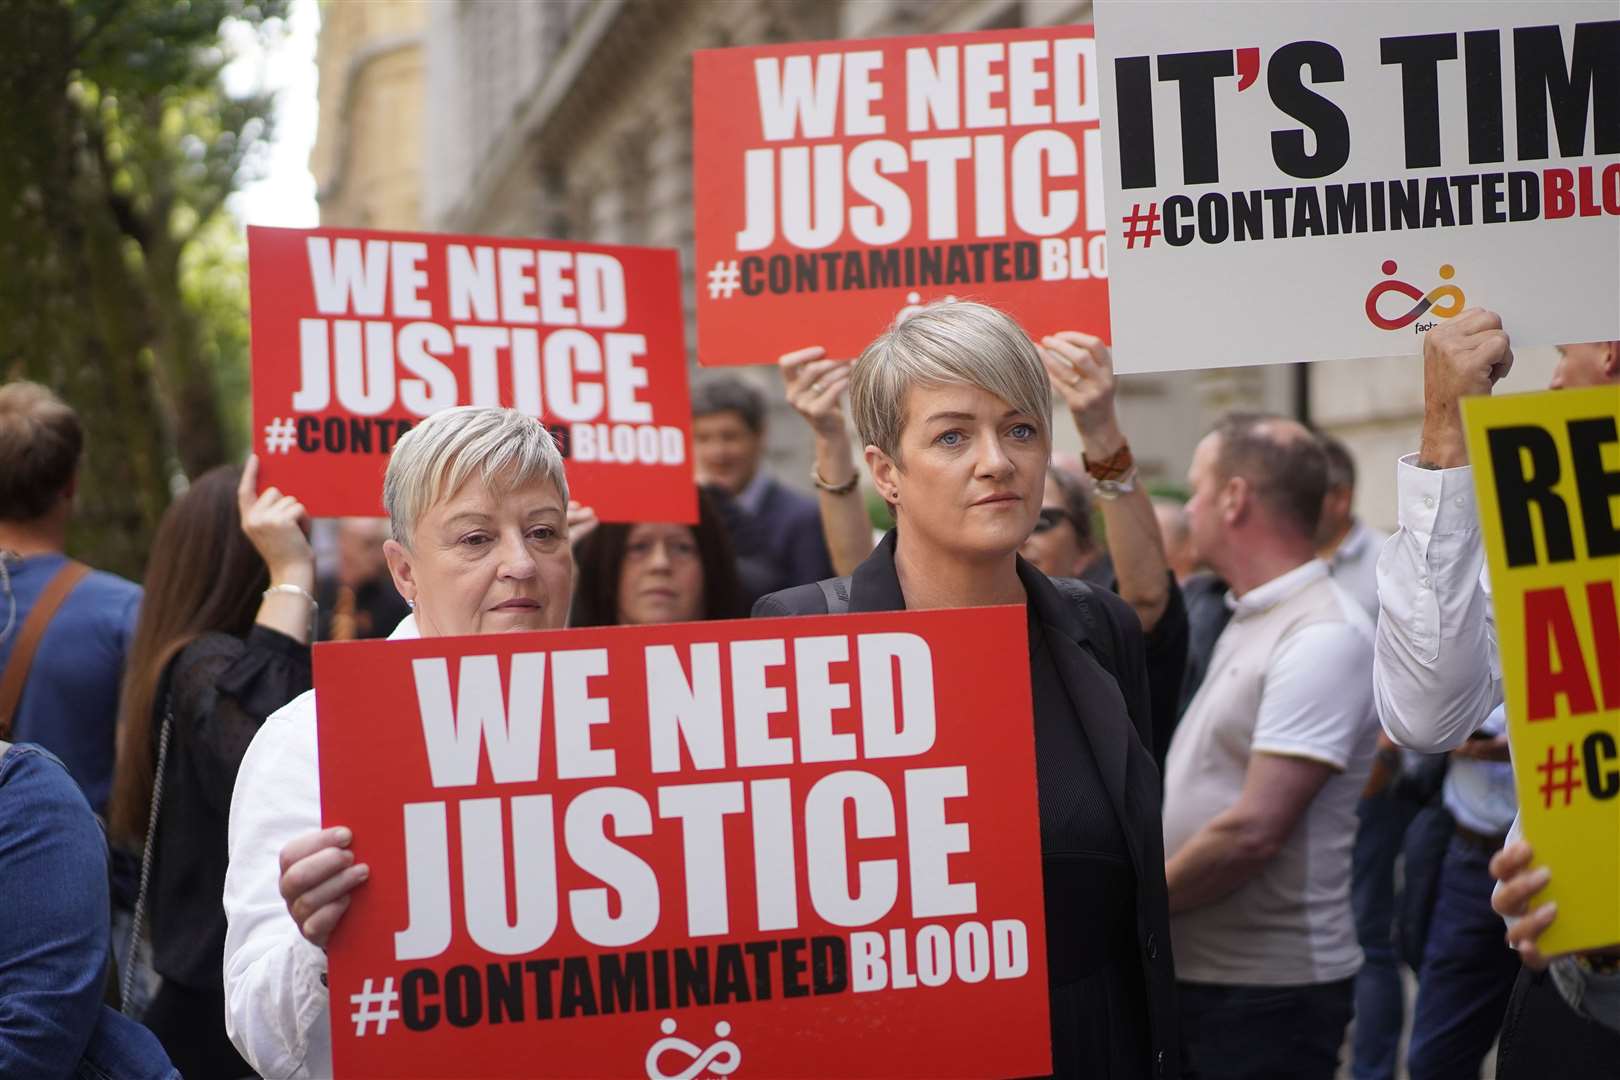 Campaigners, including many who are personally infected and affected by infected blood, gather in Westminster, London, calling for compensation for victims (Victoria Jones/PA)